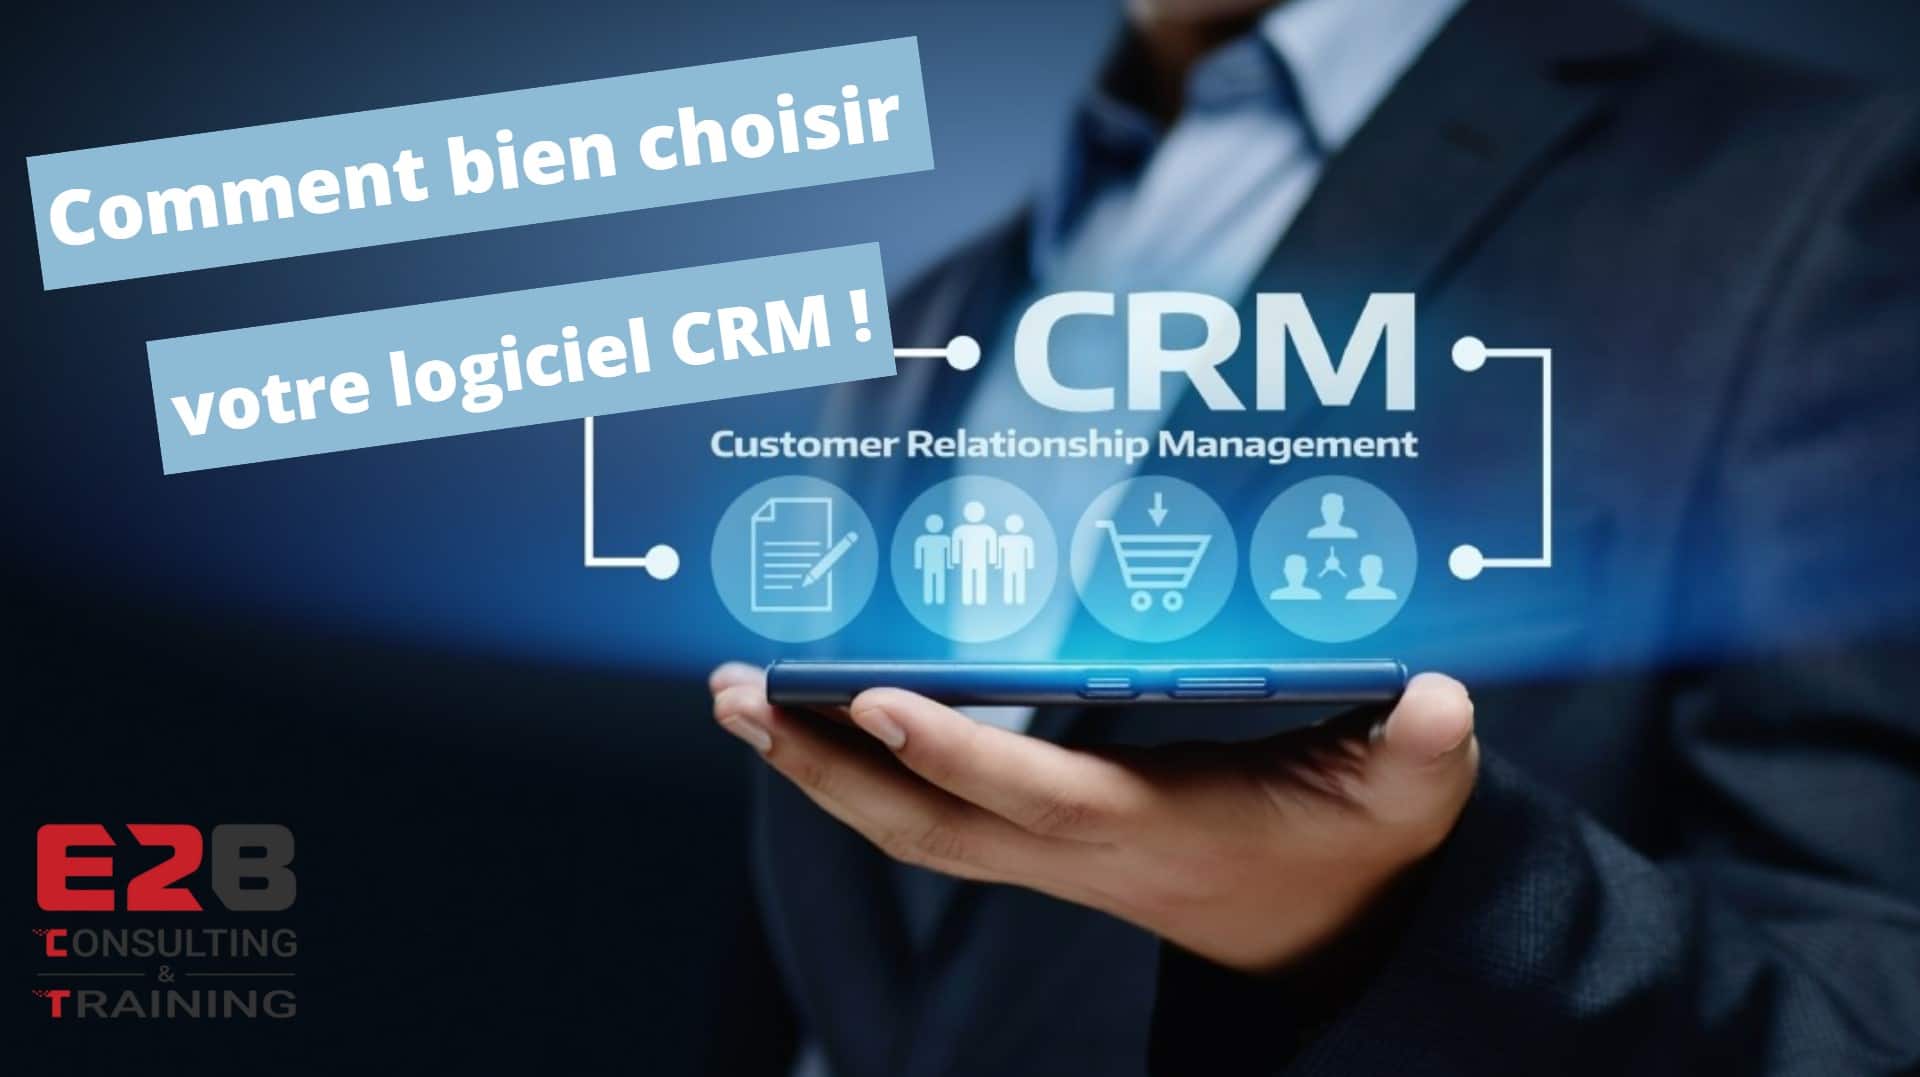 Choosing the right CRM to successfully digitalize your company